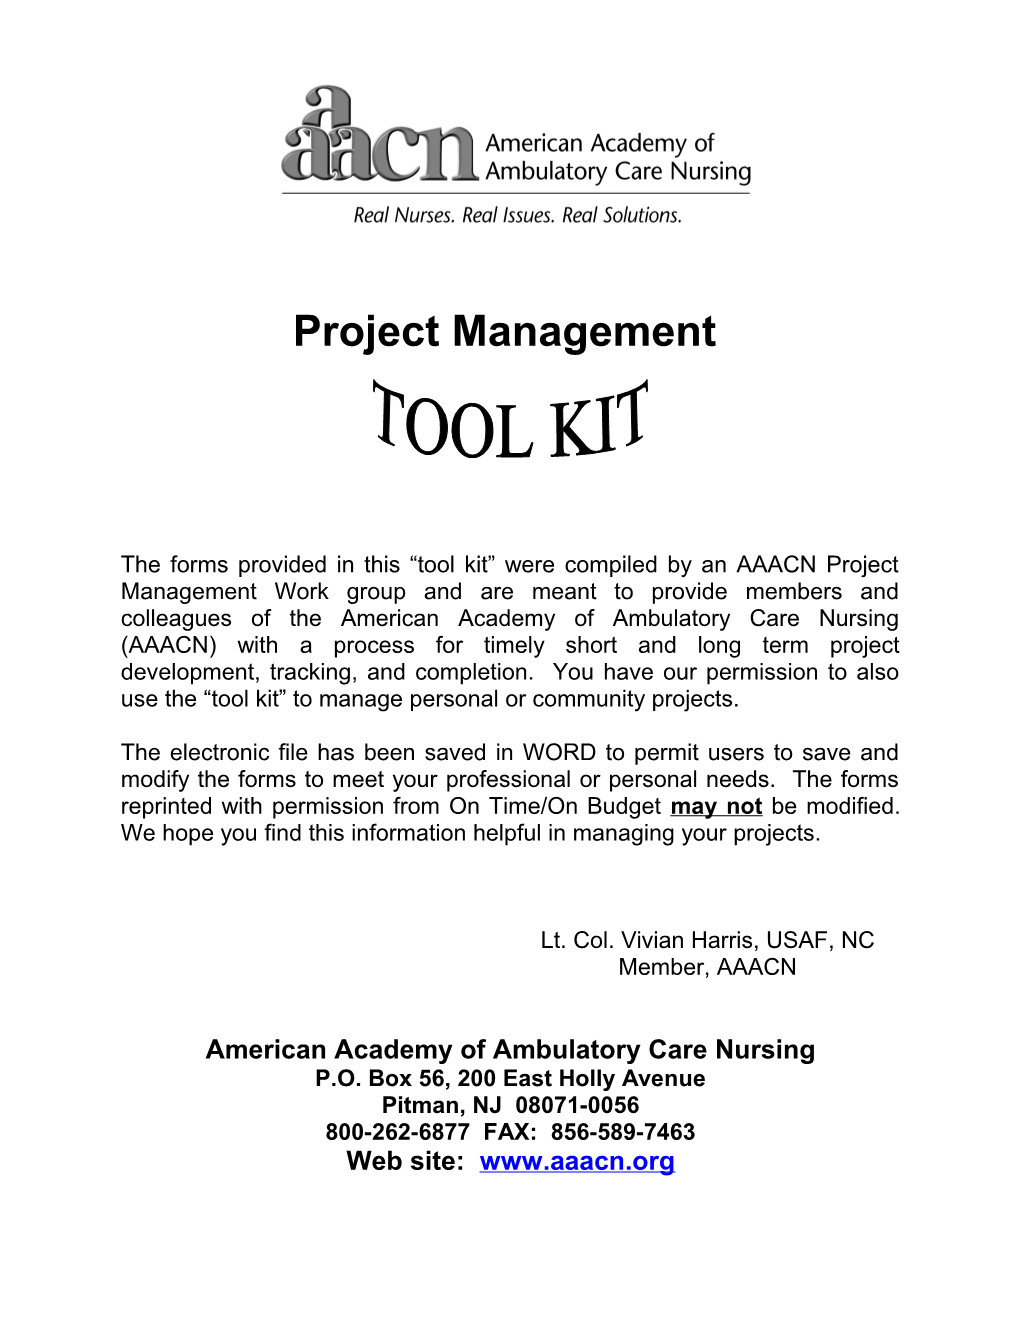 Aaacn Project Management Form